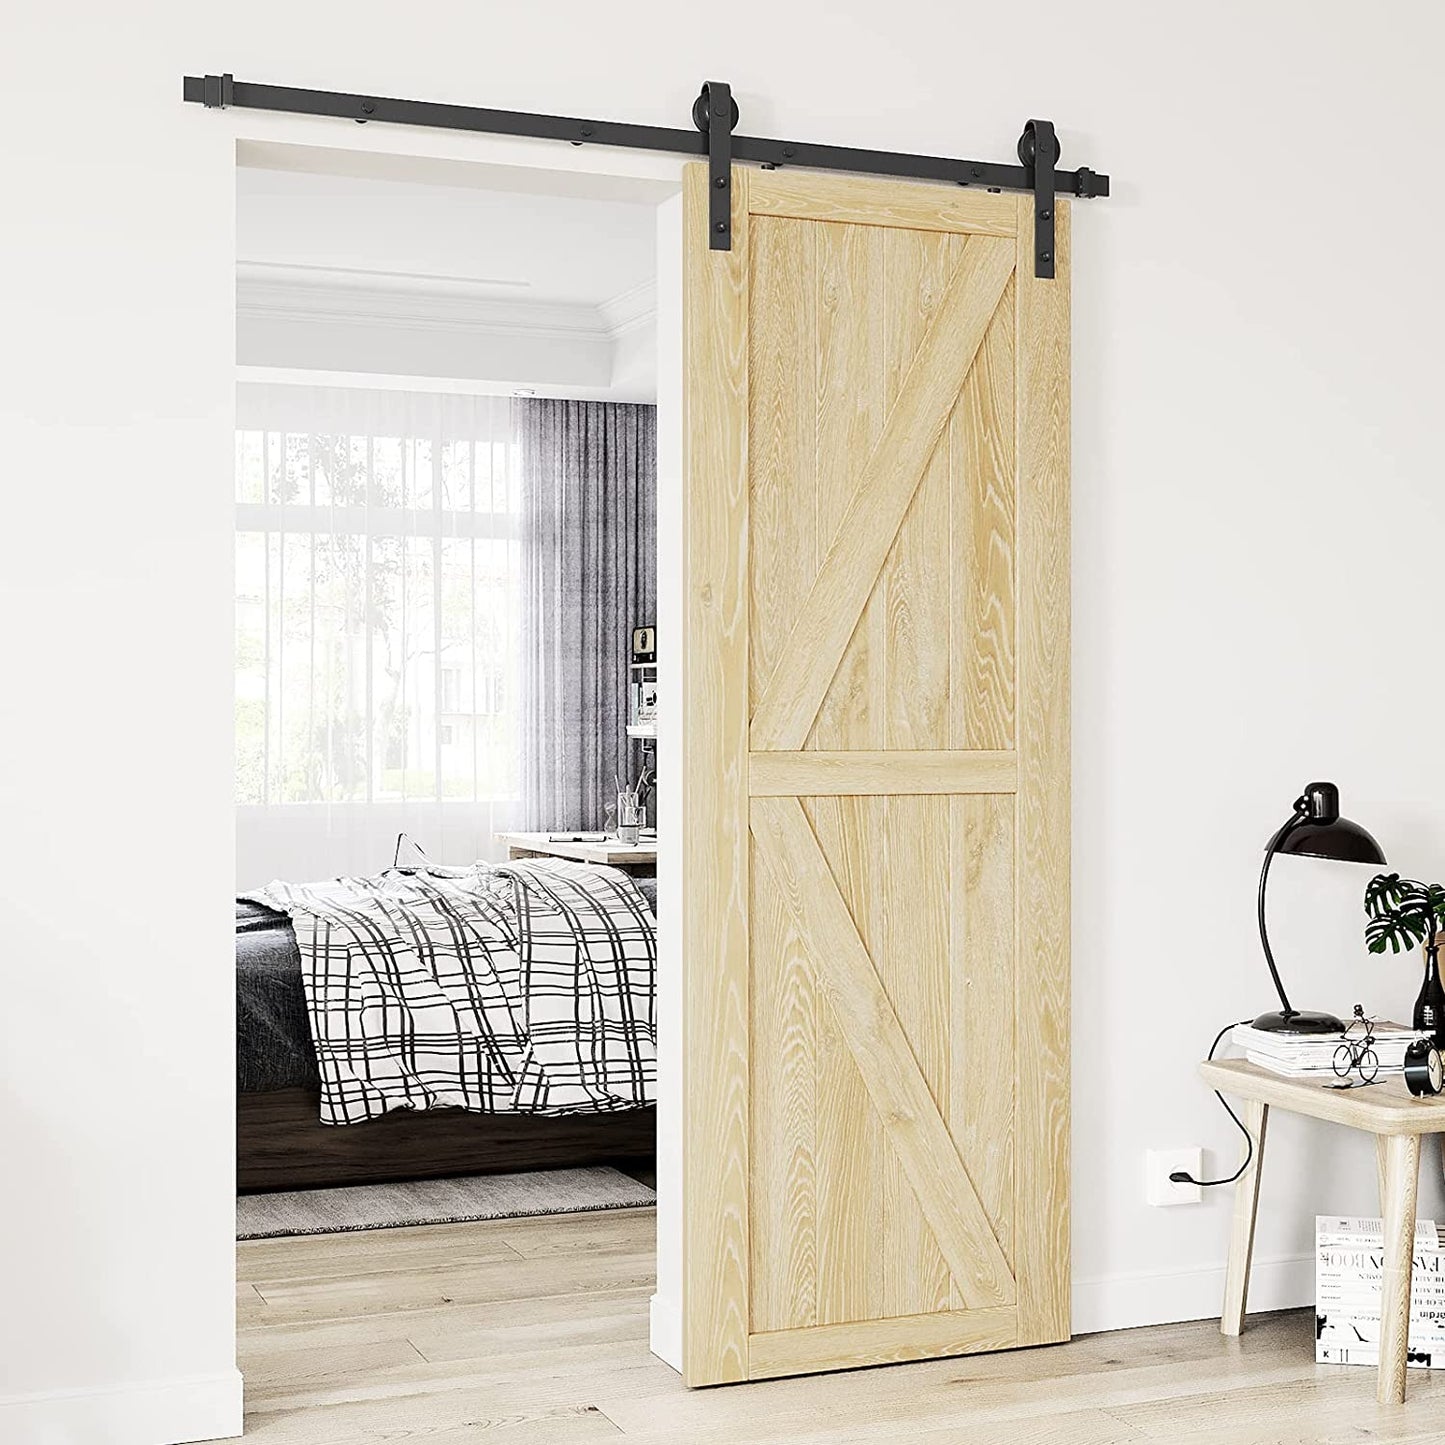 HomLux 5ft Heavy Duty Sturdy Sliding Barn Door Hardware Kit Single Door - Smoothly and Quietly - Simple and Easy to Install - Fit 1 3/8-1 3/4 inch Thickness Door Panel